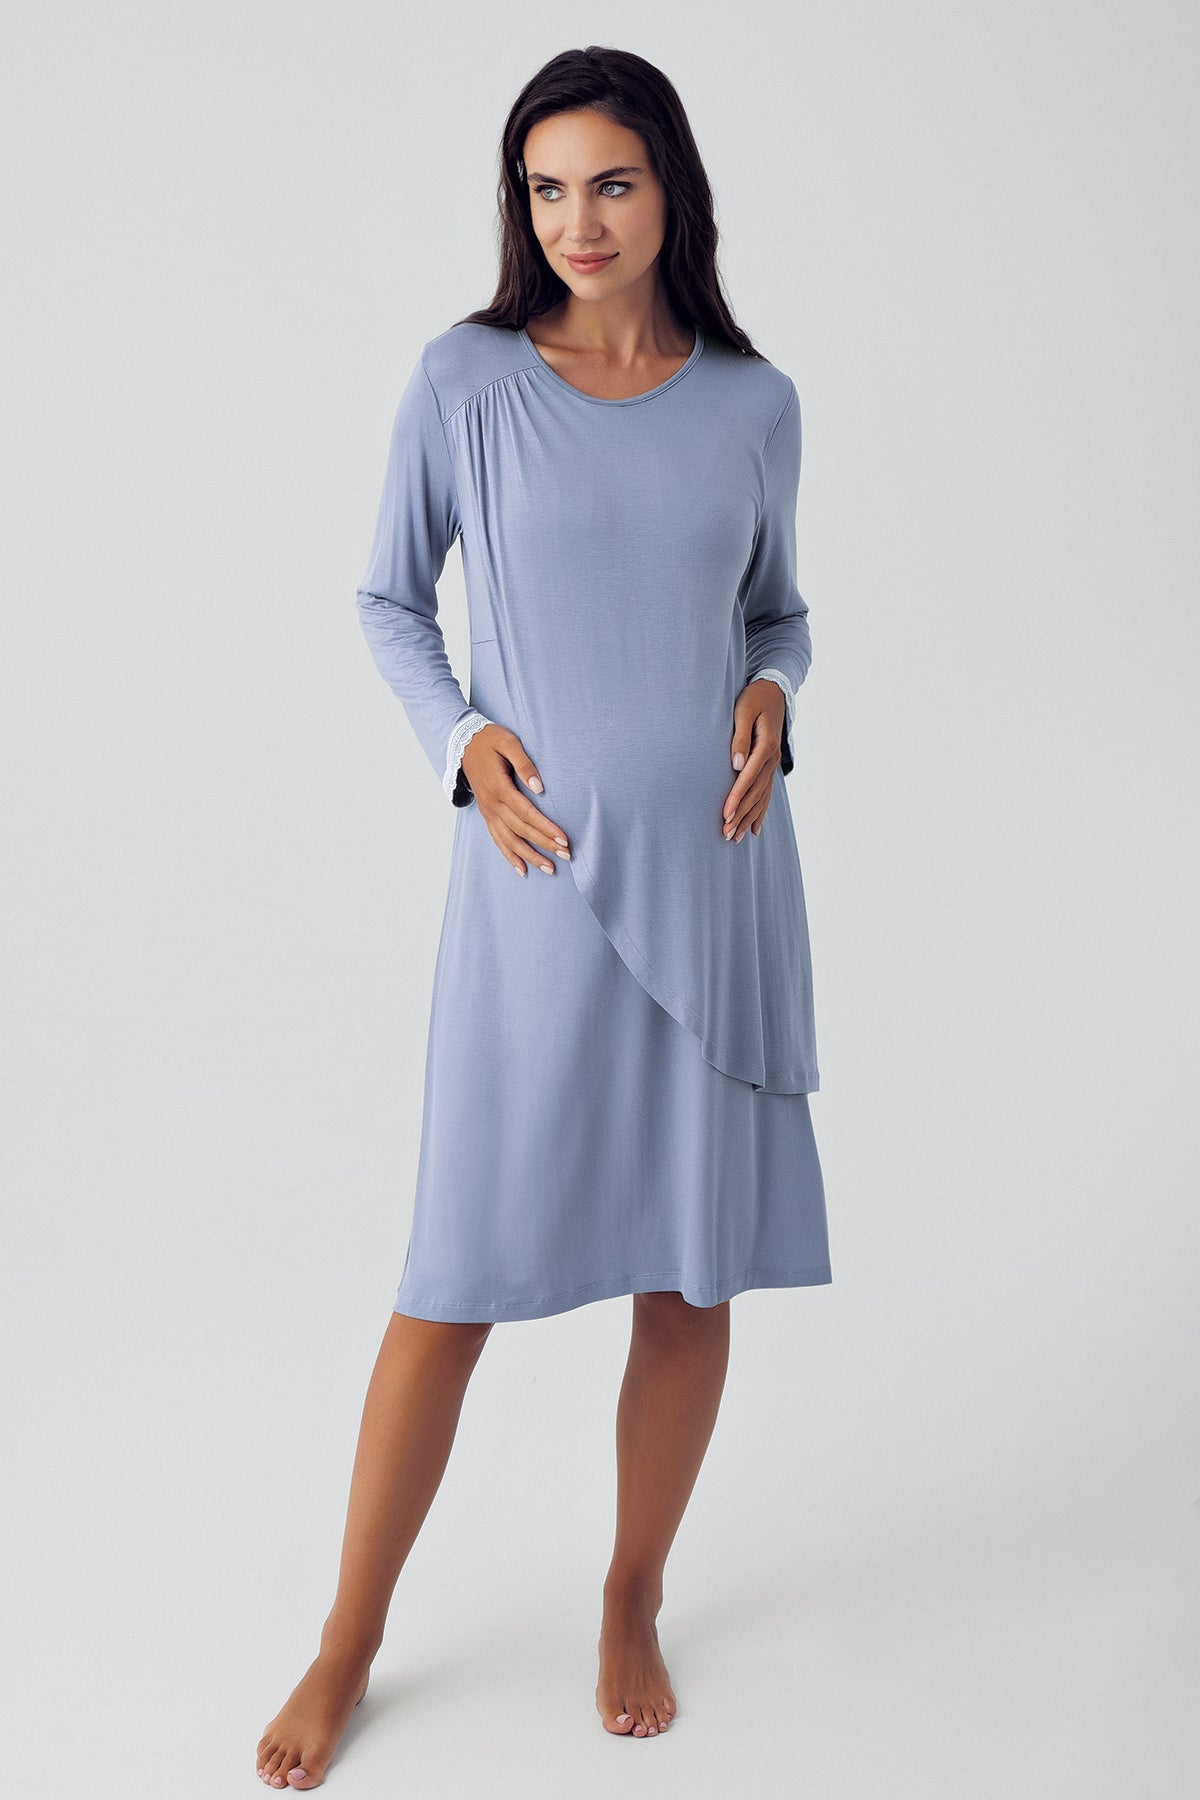 Shopymommy 15109 Wide Double Breasted Maternity & Nursing Nightgown Indigo